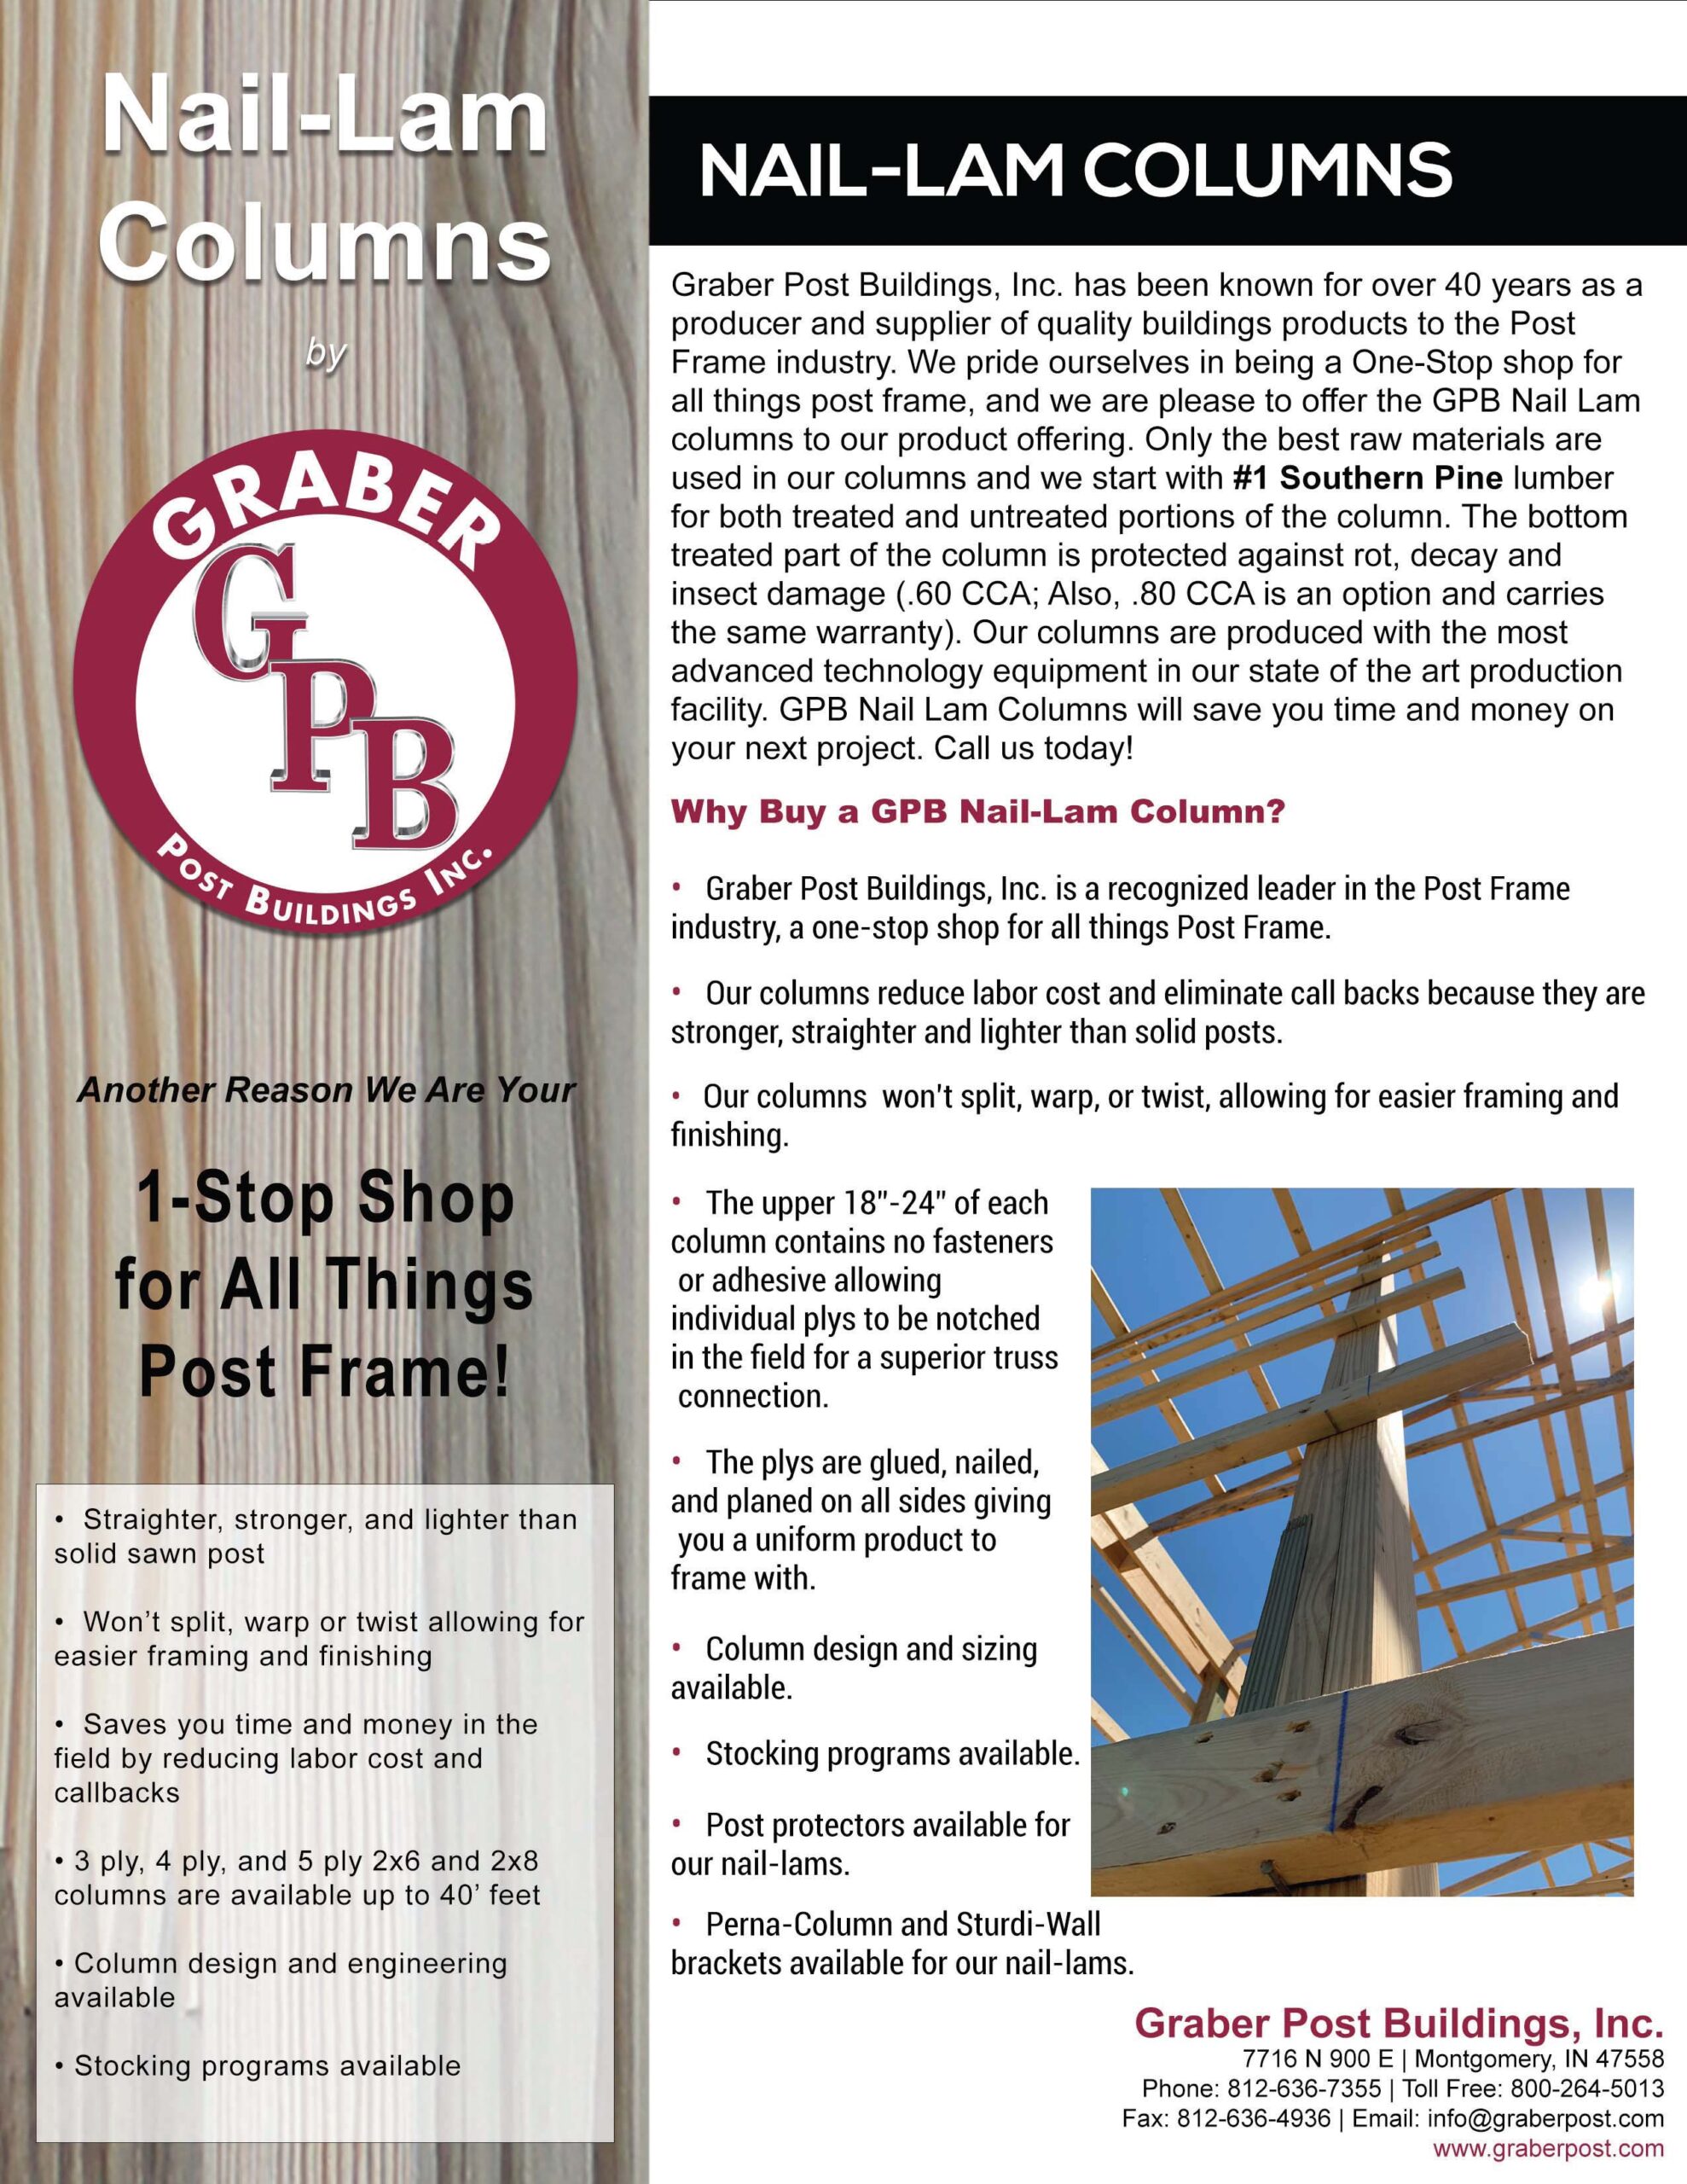 Graber post Nail-lam information for products offered through Heartland Metal and Building Supplies